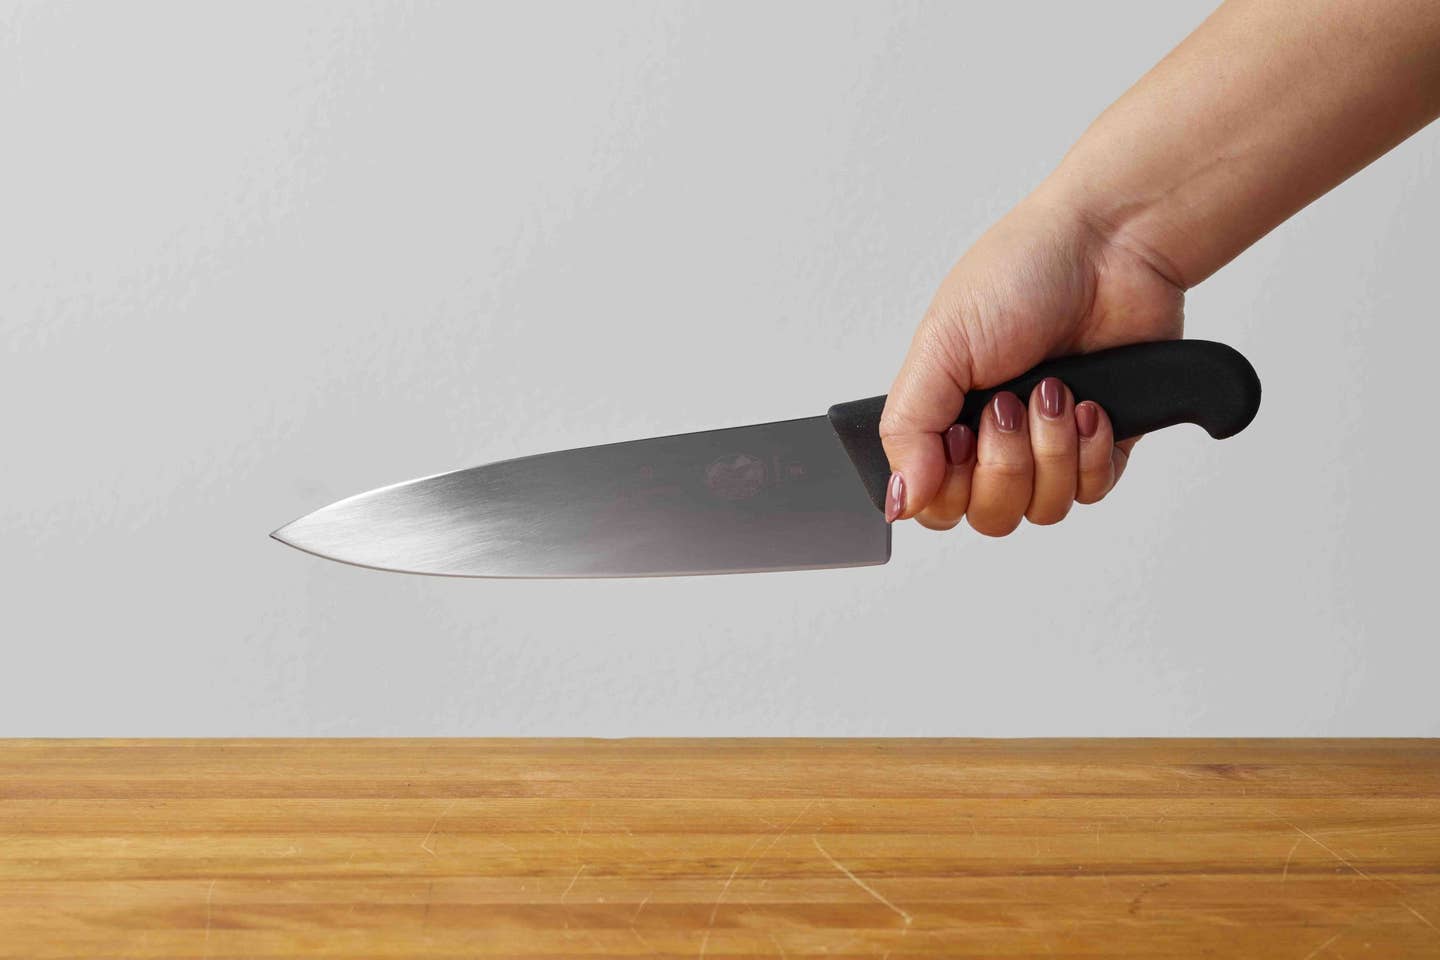 A hand holds a knife in the pinch grip